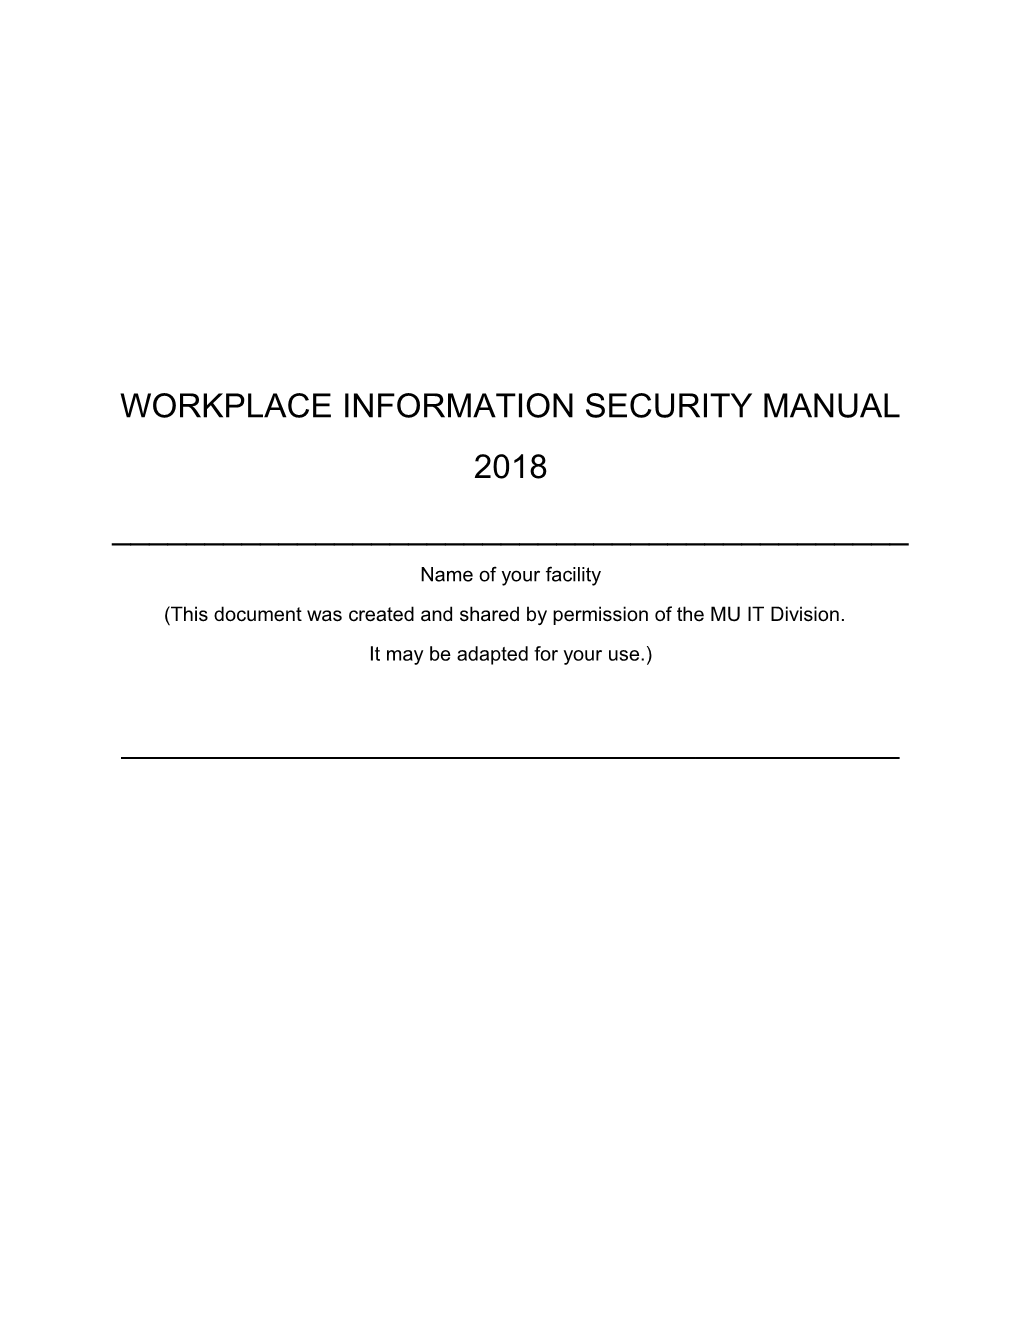 Workplace Information Security Manual